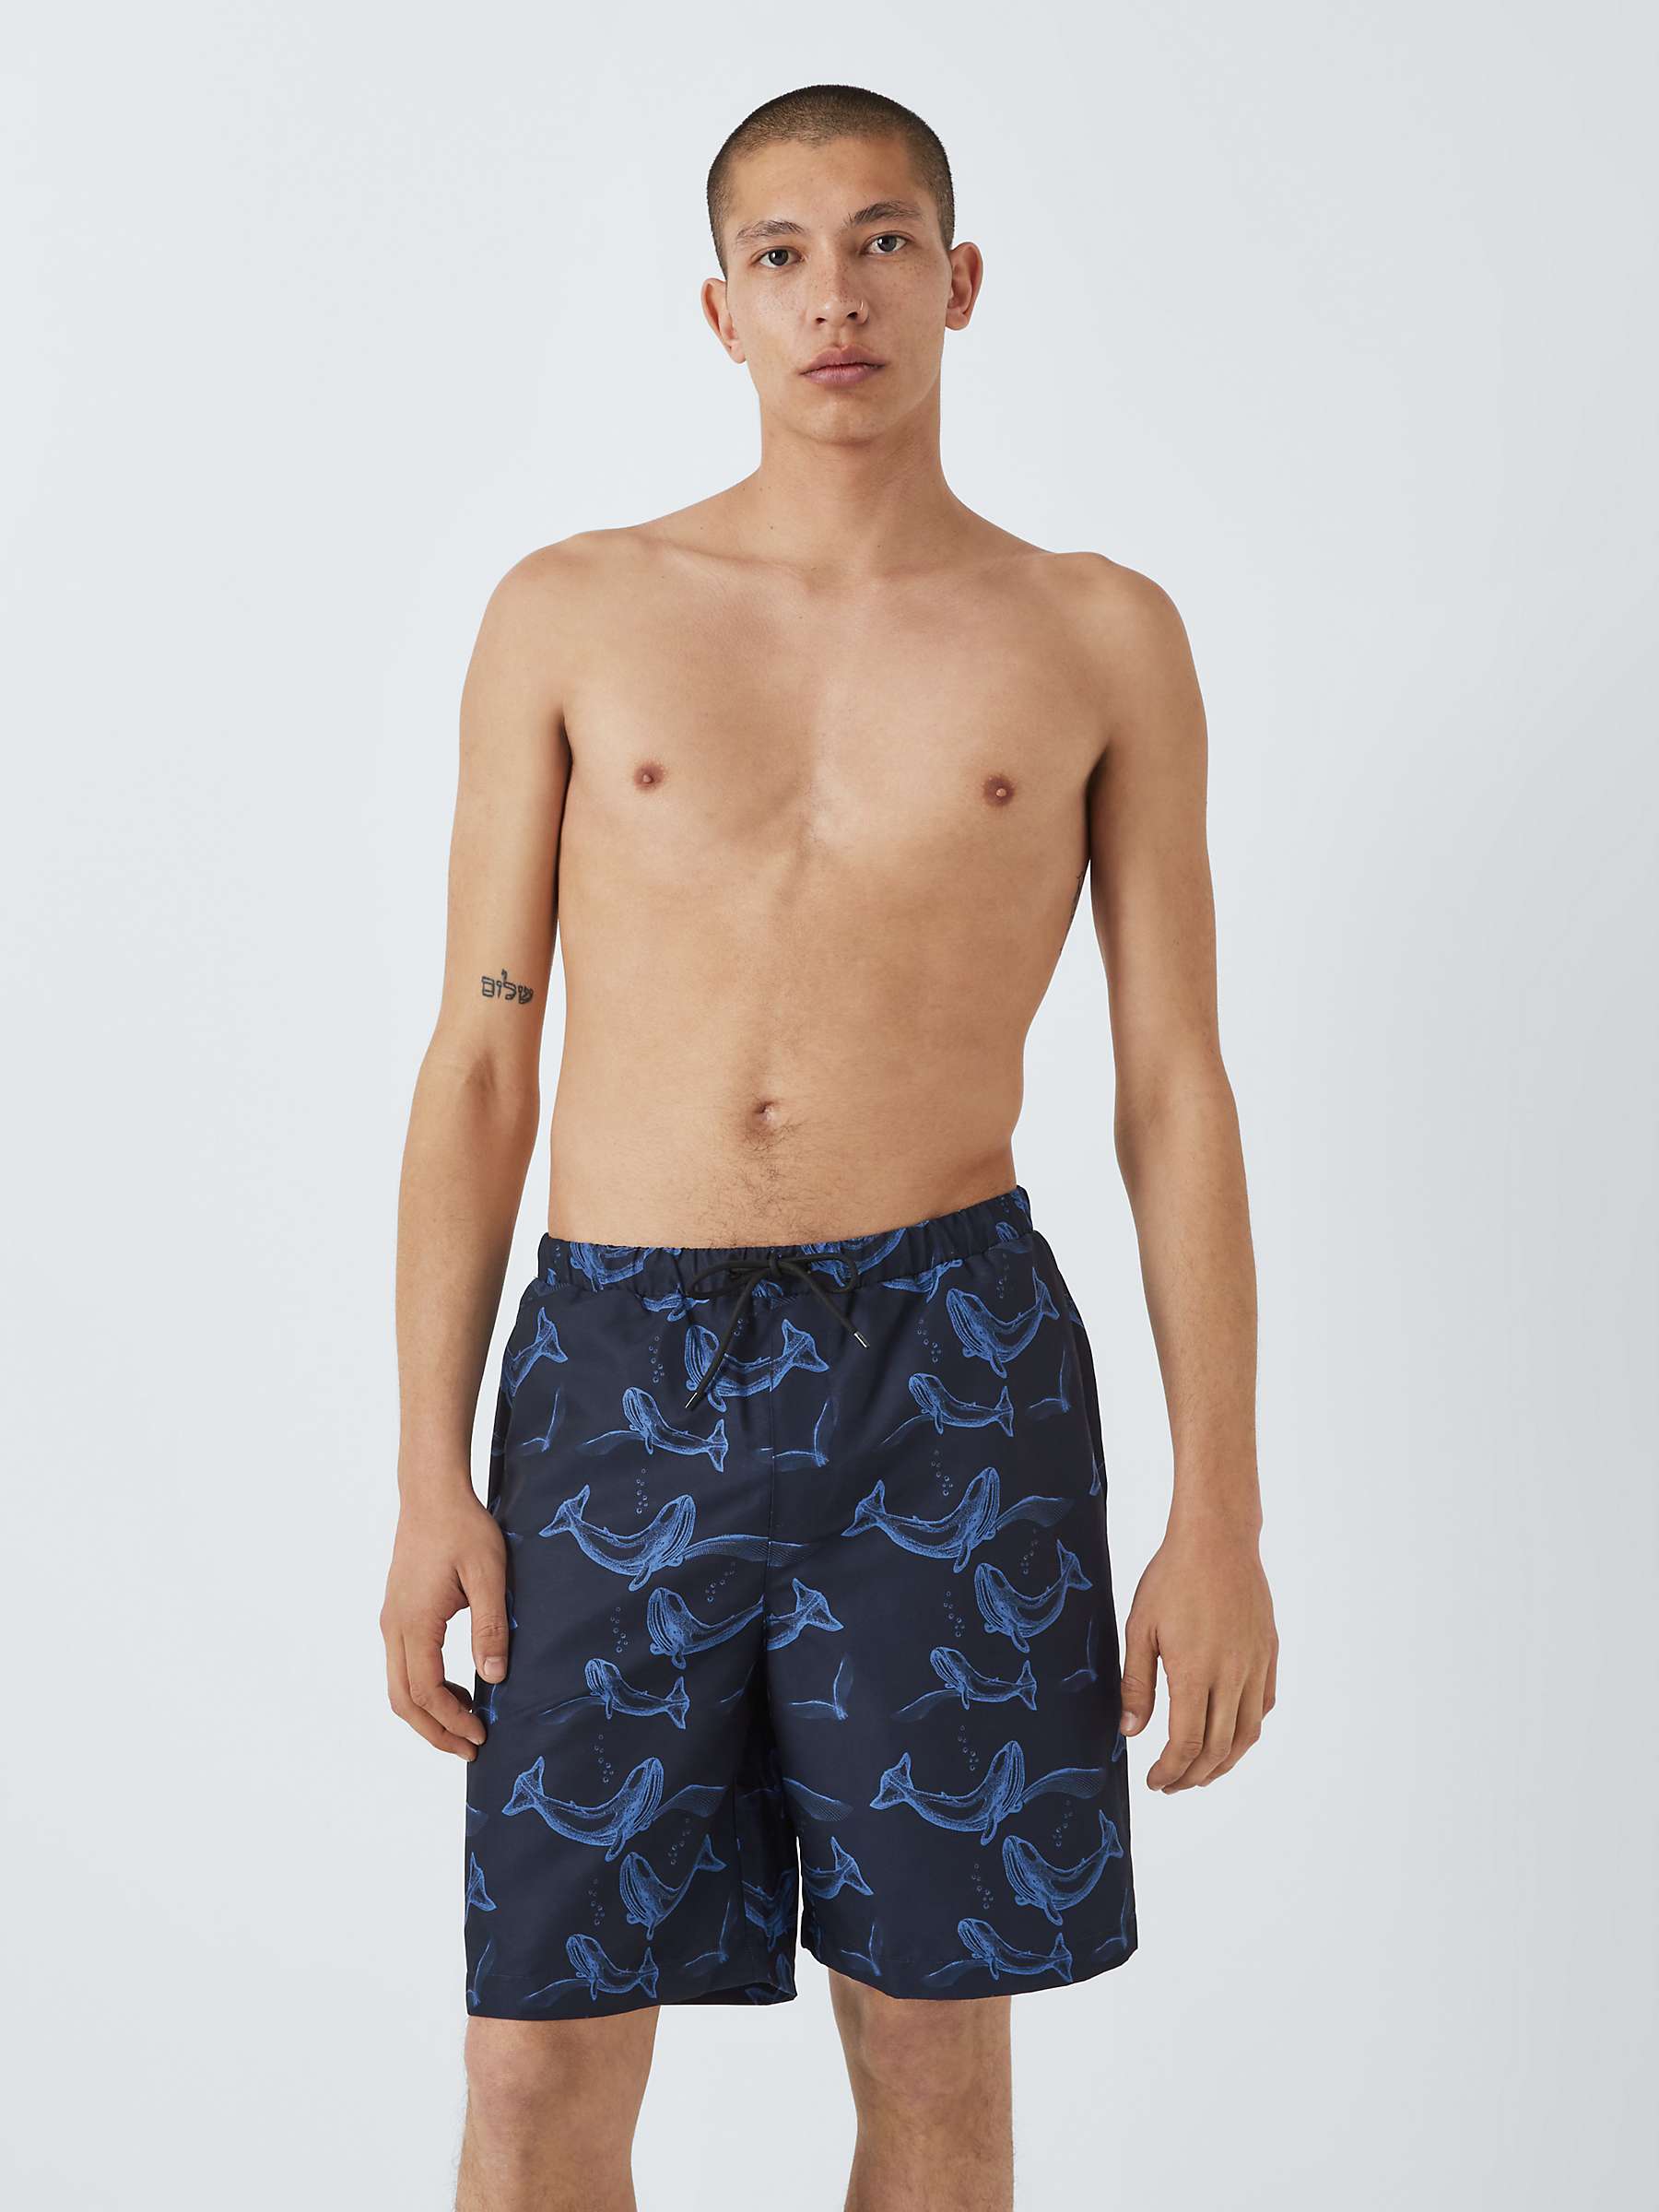 Buy Their Nibs Whale Print Swim Shorts Online at johnlewis.com